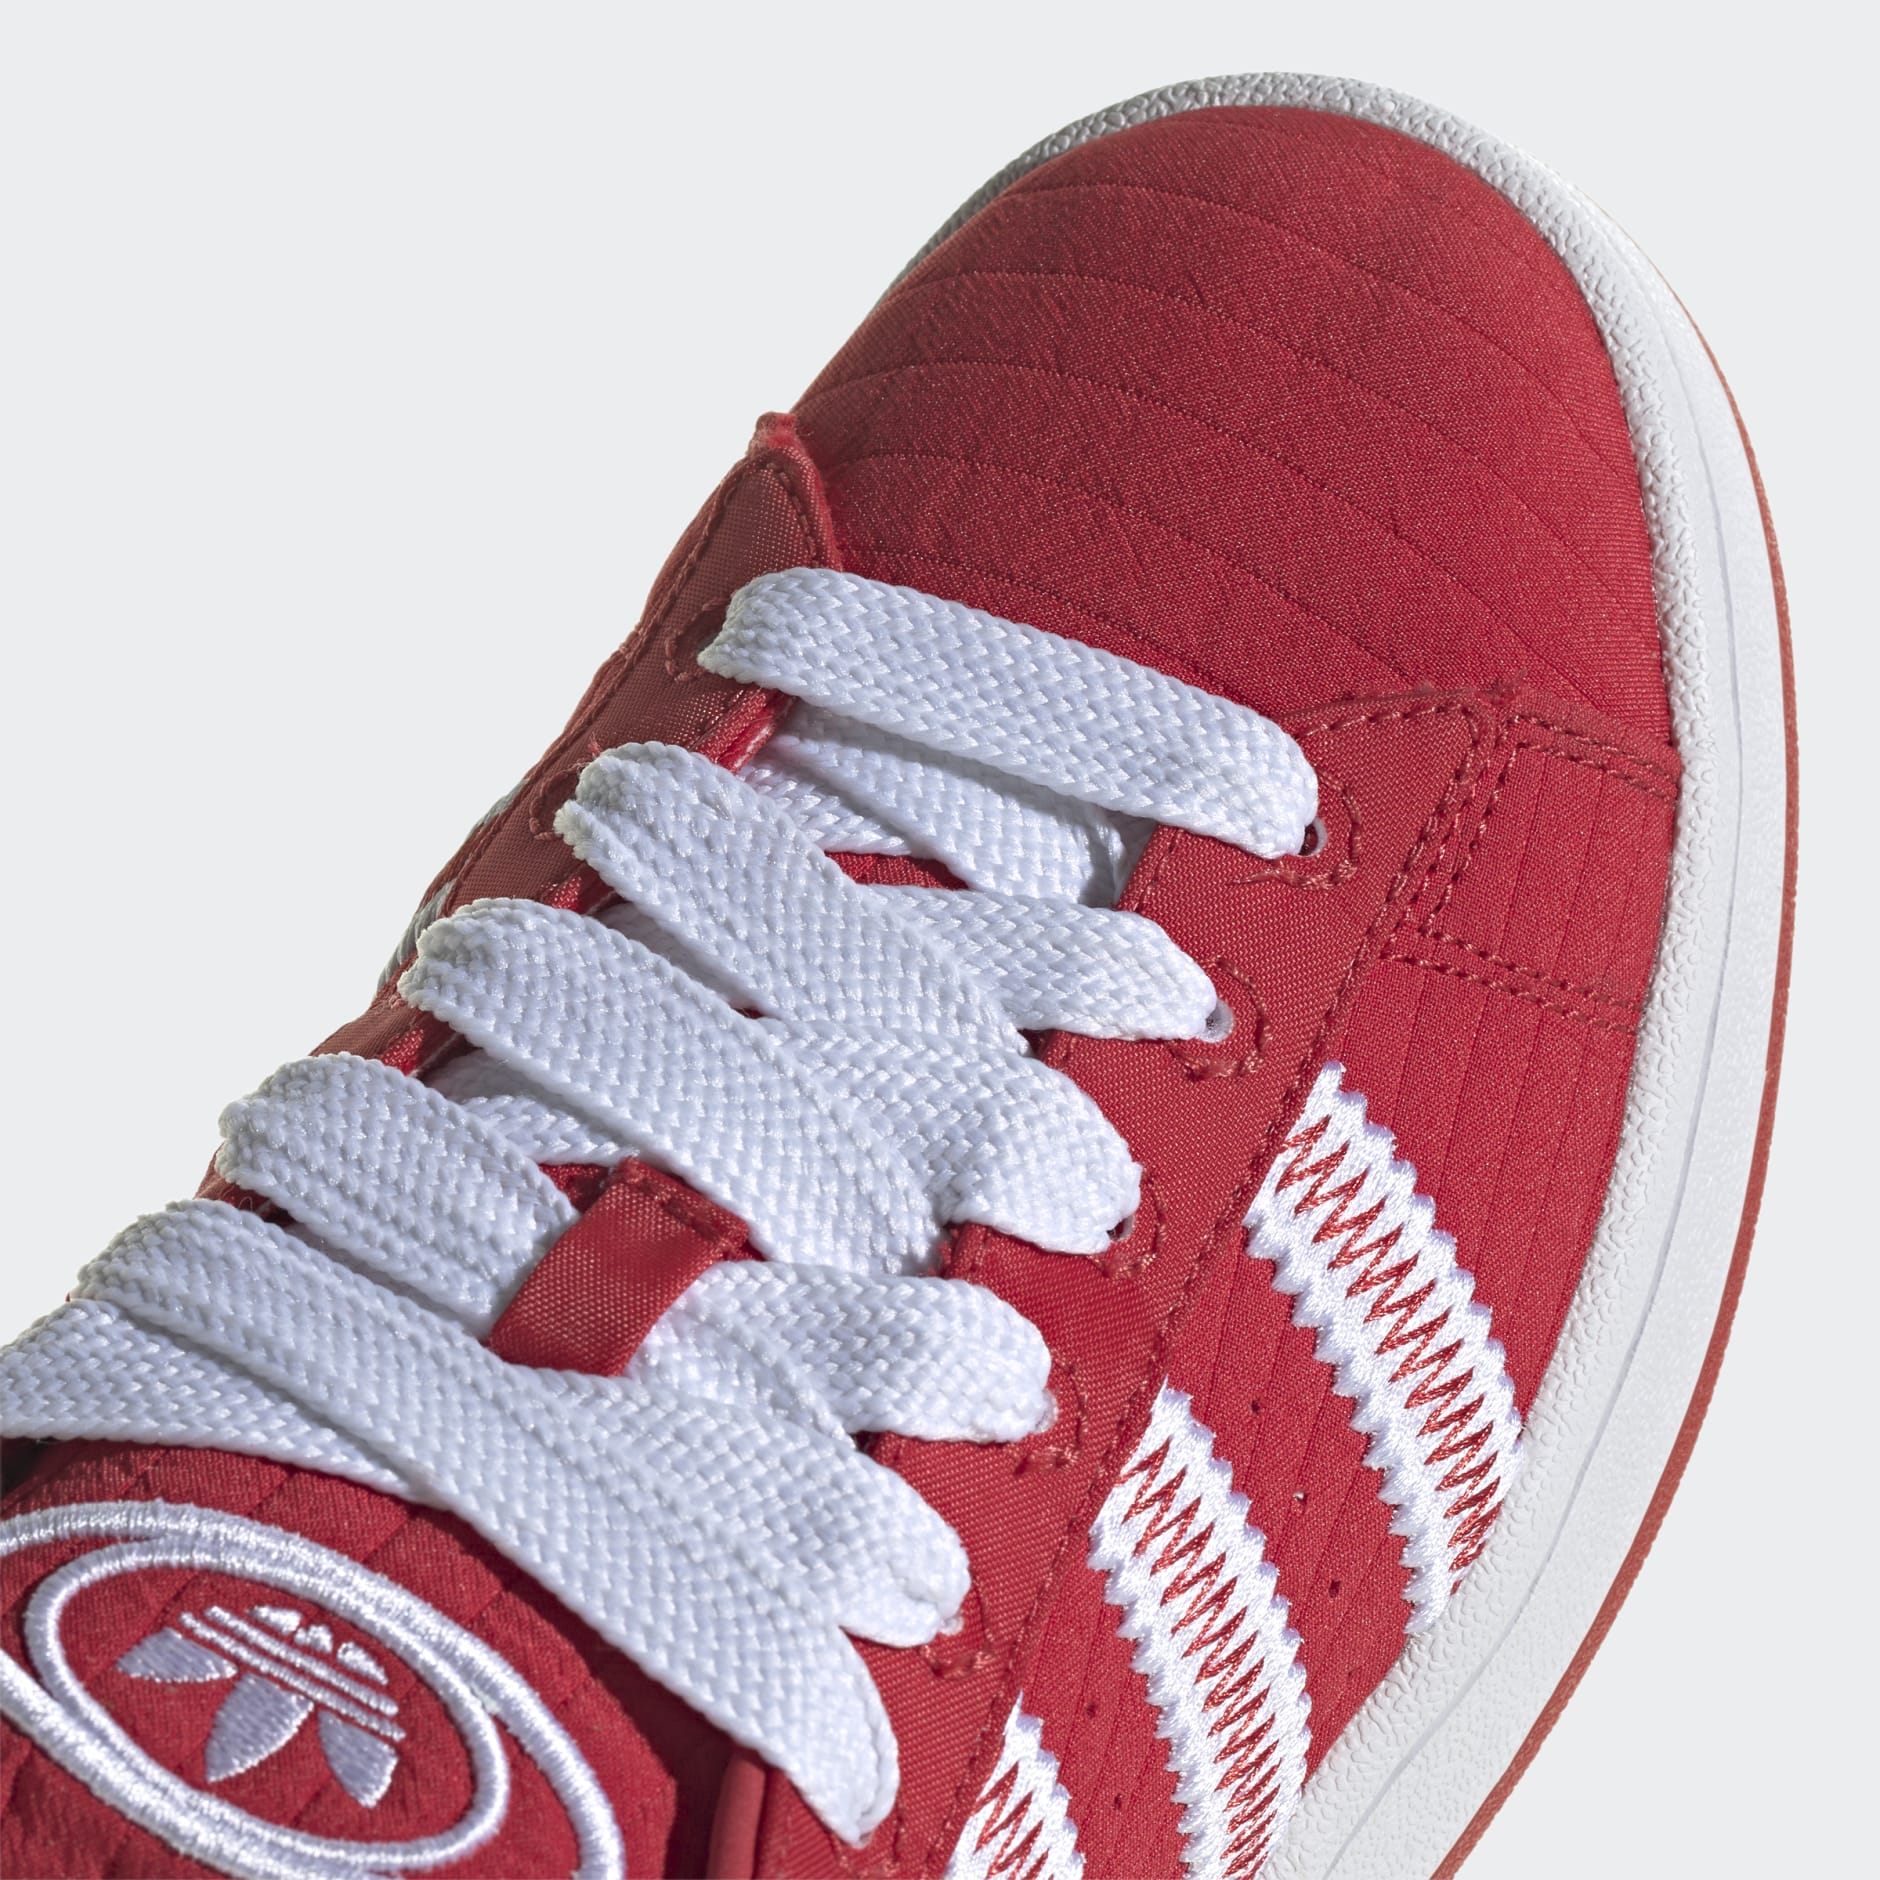 Women's Shoes - Campus 00s Shoes - Red adidas Saudi Arabia